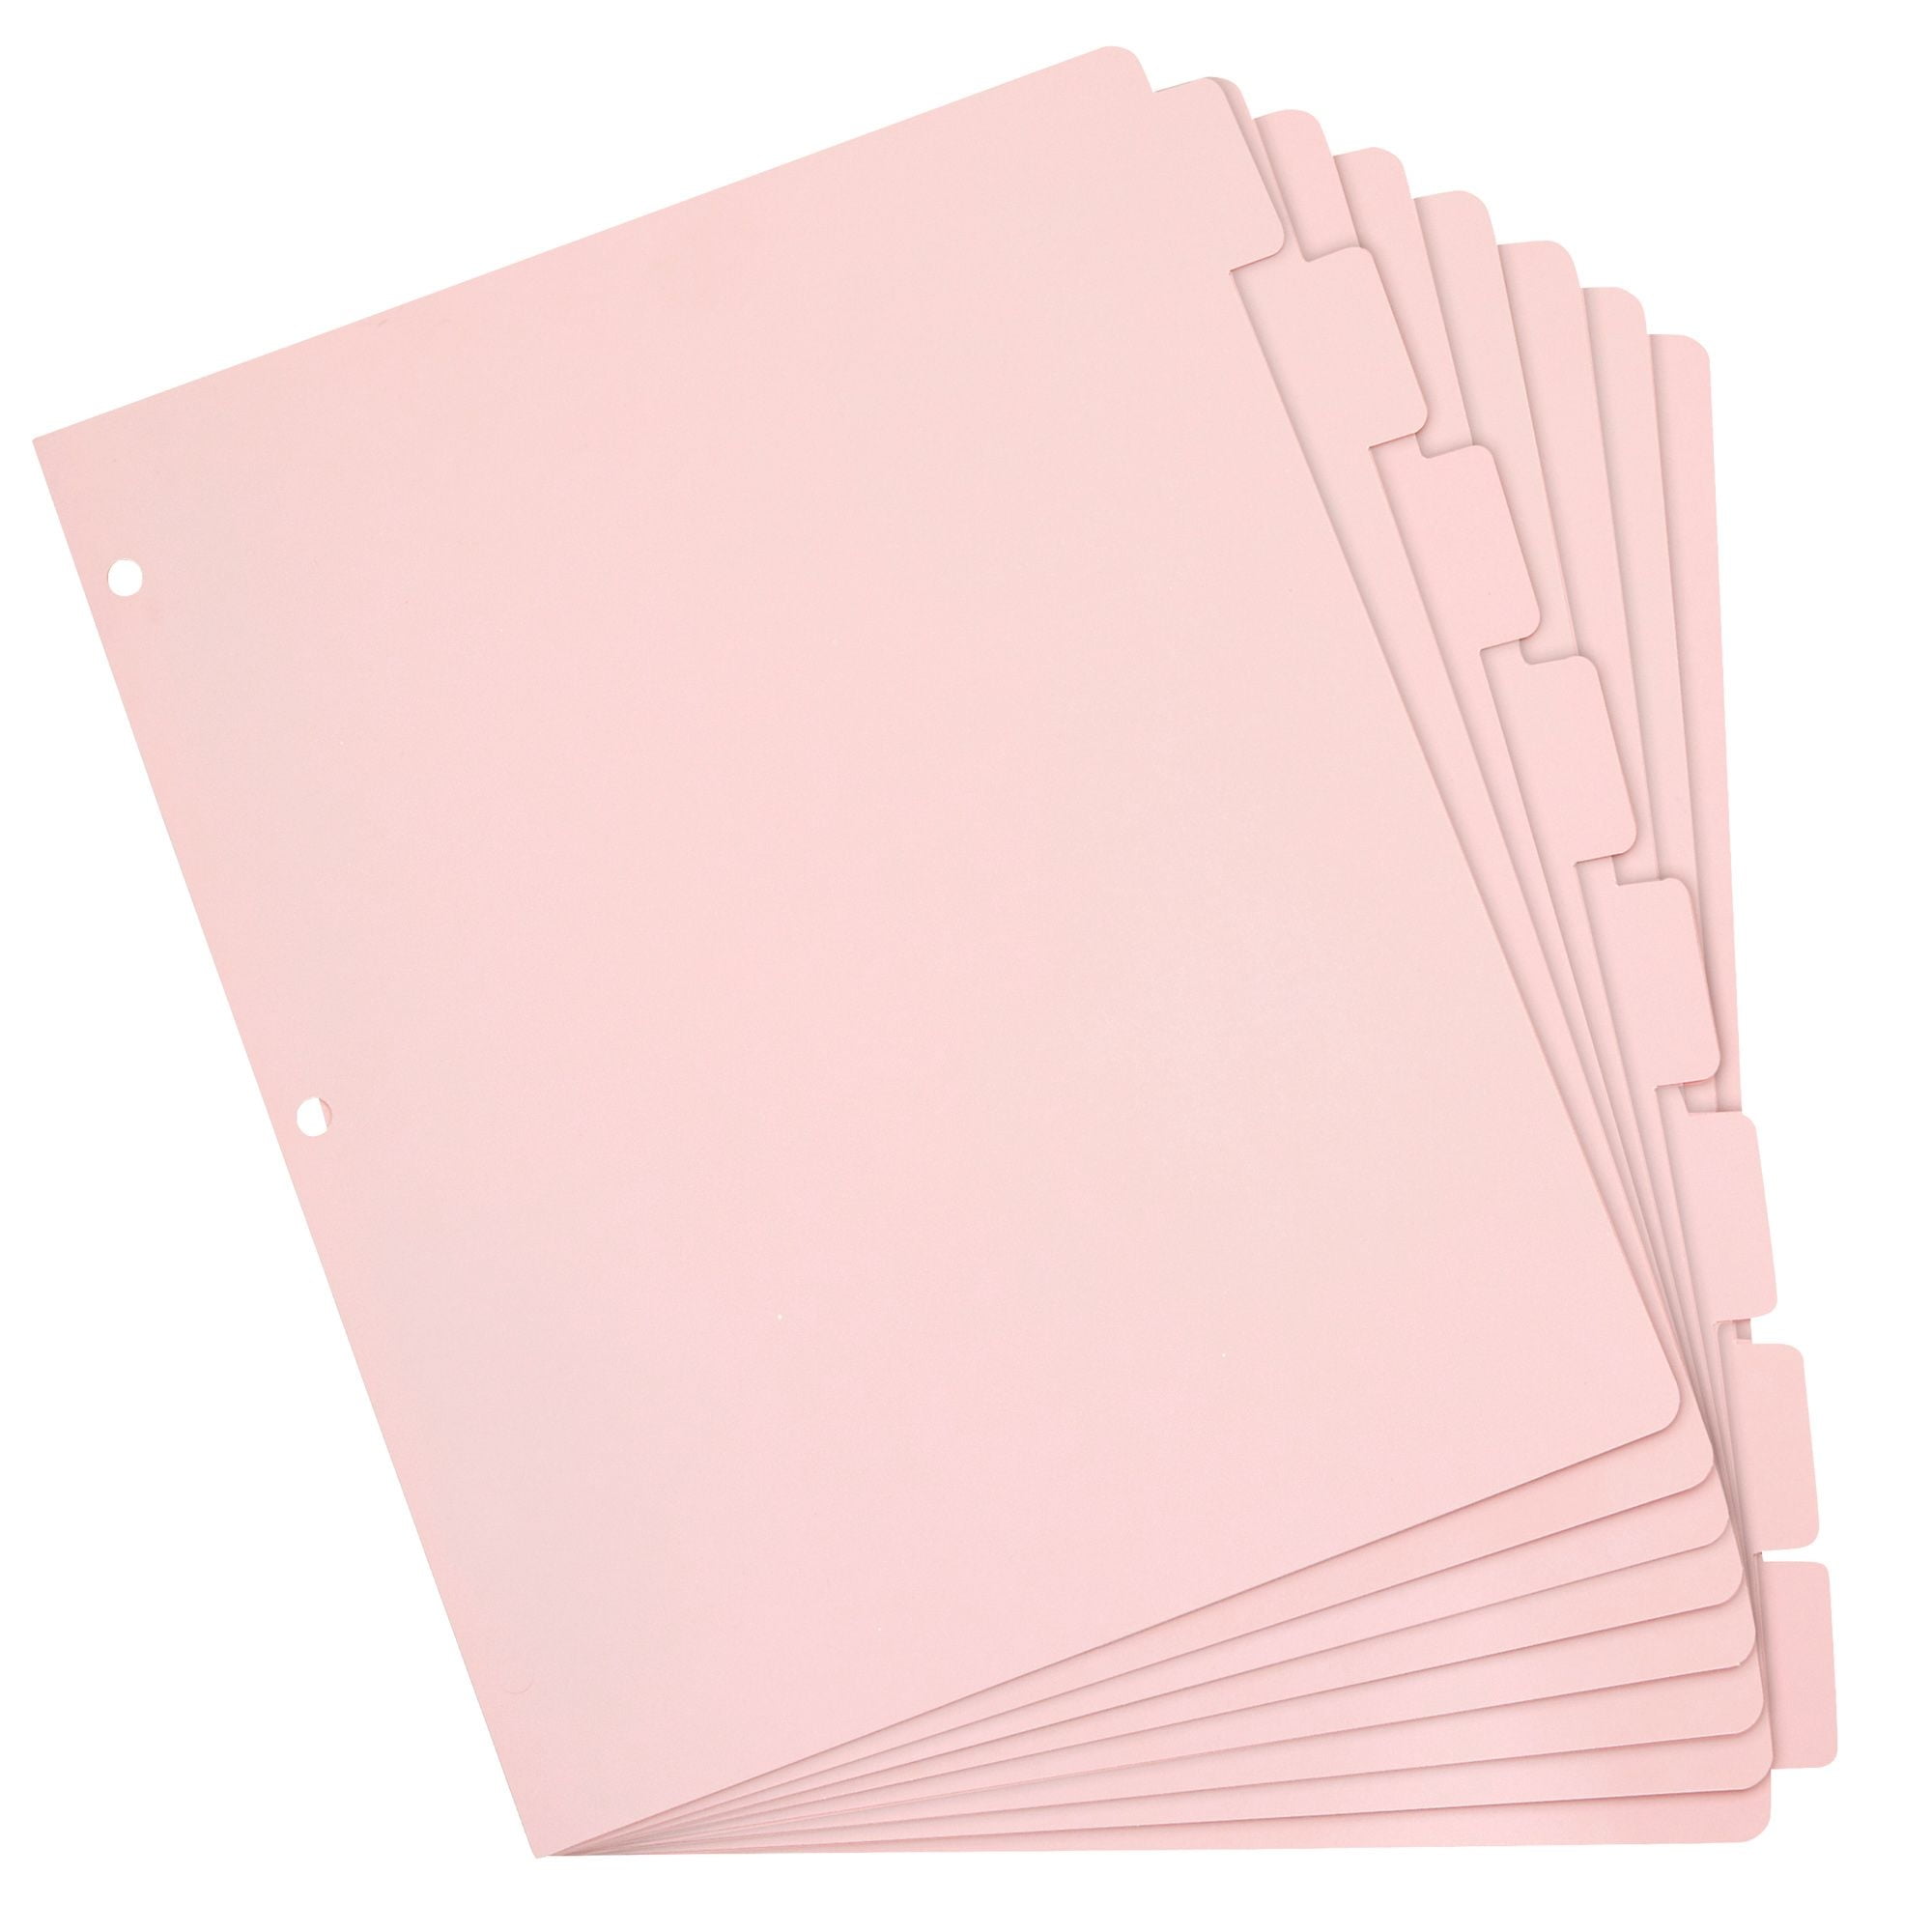 12 Sets Pink 8 Dividers for 3 Ring Binder, Paper Binder Separators with Tabs, Bulk Pack of 96 Total Dividers for School, Work, Home, Office Supplies (Letter Size, 9.5x11 in) Walmart.com